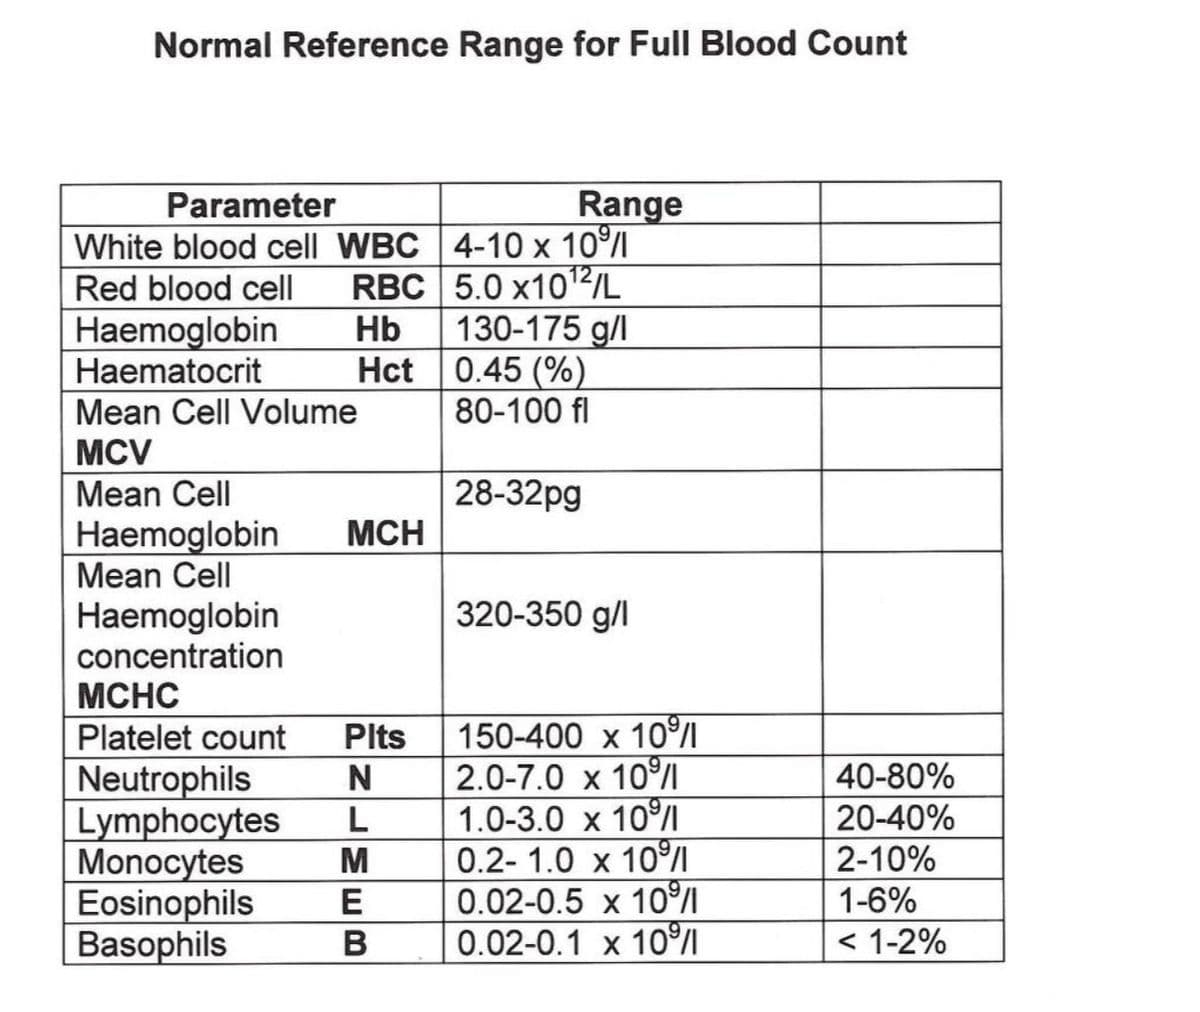 Normal Reference Range for Full Blood Count
Parameter
White blood cell WBC 4-10 x 10⁹
Red blood cell RBC
5.0 x10¹2/L
Haemoglobin
Haematocrit
Mean Cell Volume
MCV
Mean Cell
Haemoglobin
Mean Cell
Haemoglobin
concentration
Hb
Hct
MCH
MCHC
Platelet count Pits
Range
Neutrophils
N
Lymphocytes L
Monocytes M
Eosinophils E
Basophils
B
130-175 g/l
0.45 (%)
80-100 fl
28-32pg
320-350 g/l
150-400 x 10⁹
2.0-7.0 x 10⁹/1
1.0-3.0 x 10⁹/1
0.2-1.0 x 10⁹/1
0.02-0.5 x 109/
0.02-0.1 x 10⁹
40-80%
20-40%
2-10%
1-6%
< 1-2%